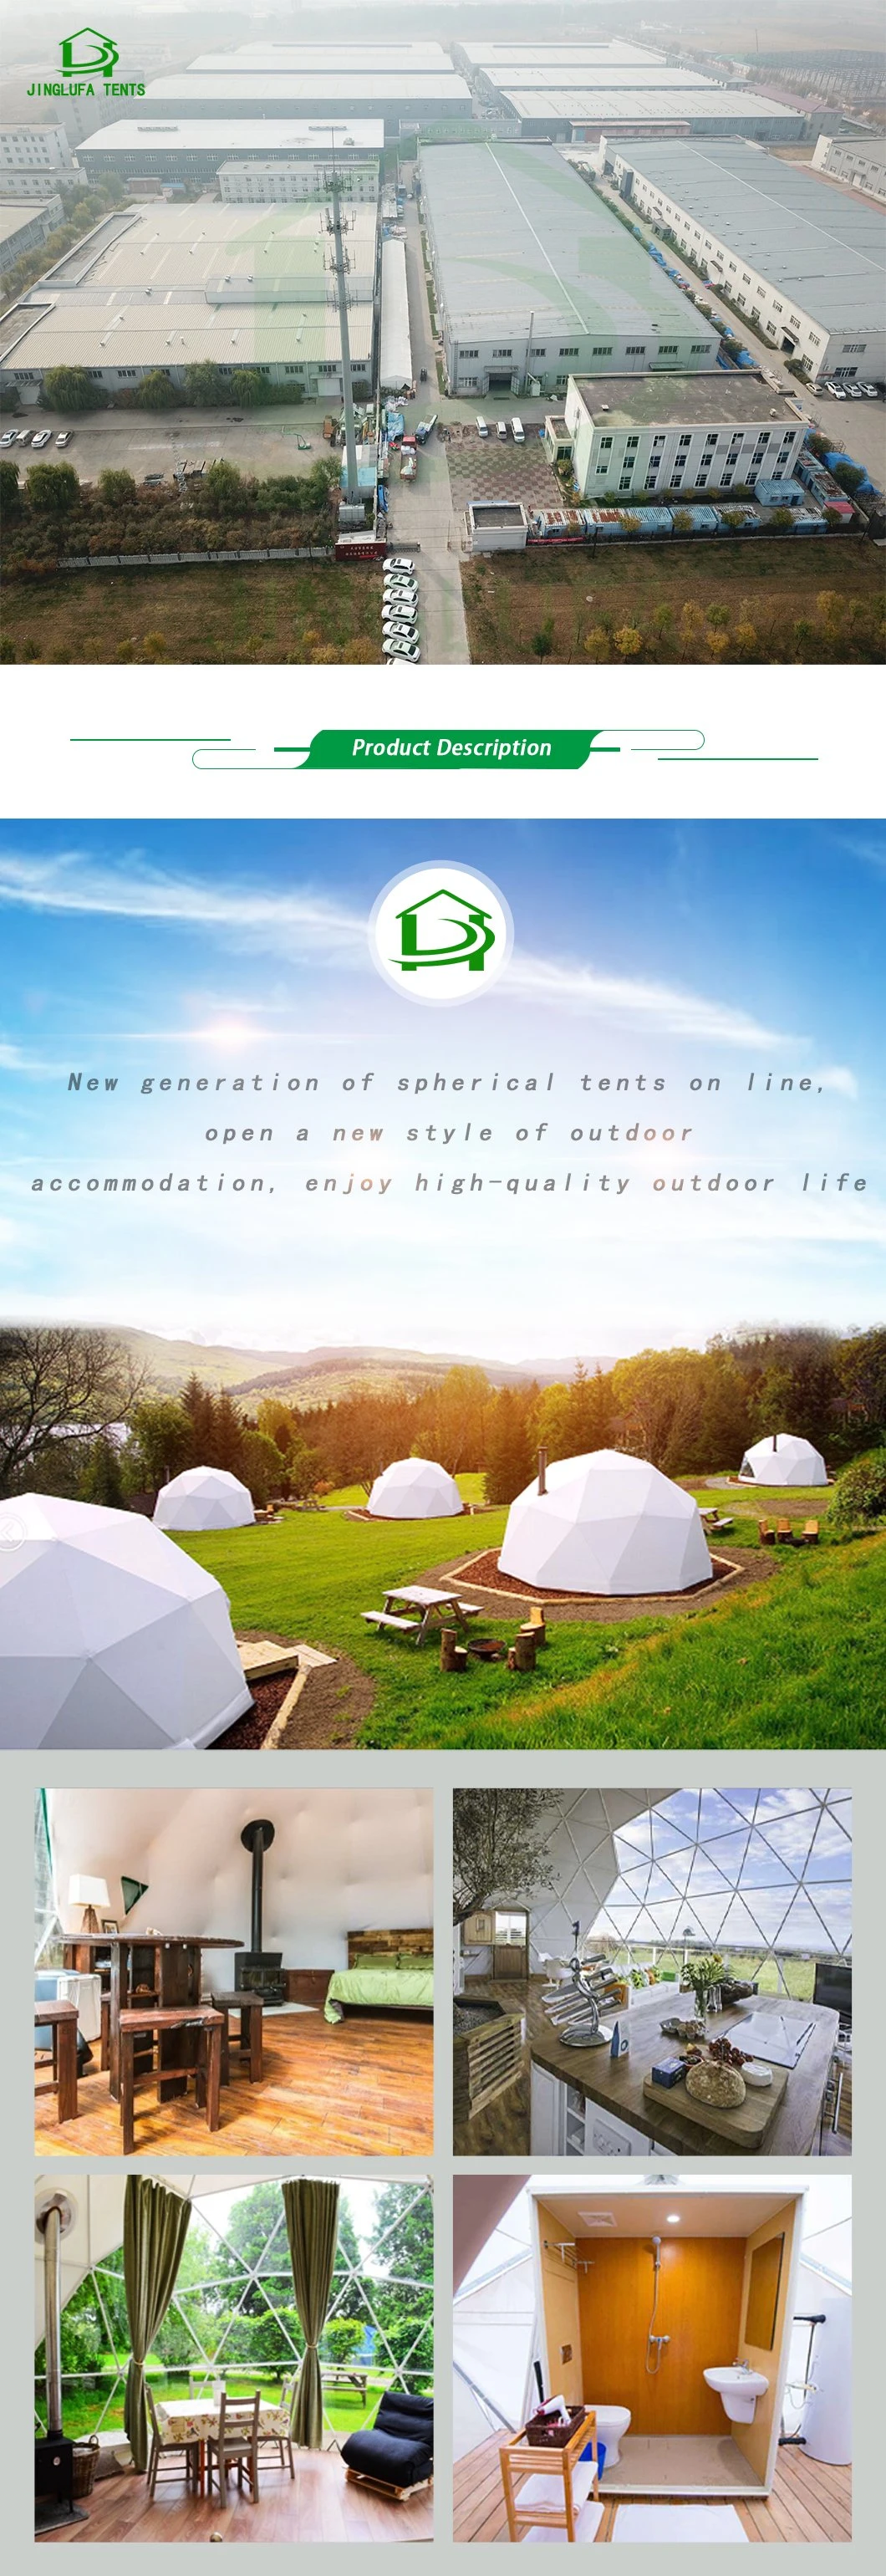 Living Room Luxury Hotel Dome Tents for Sale